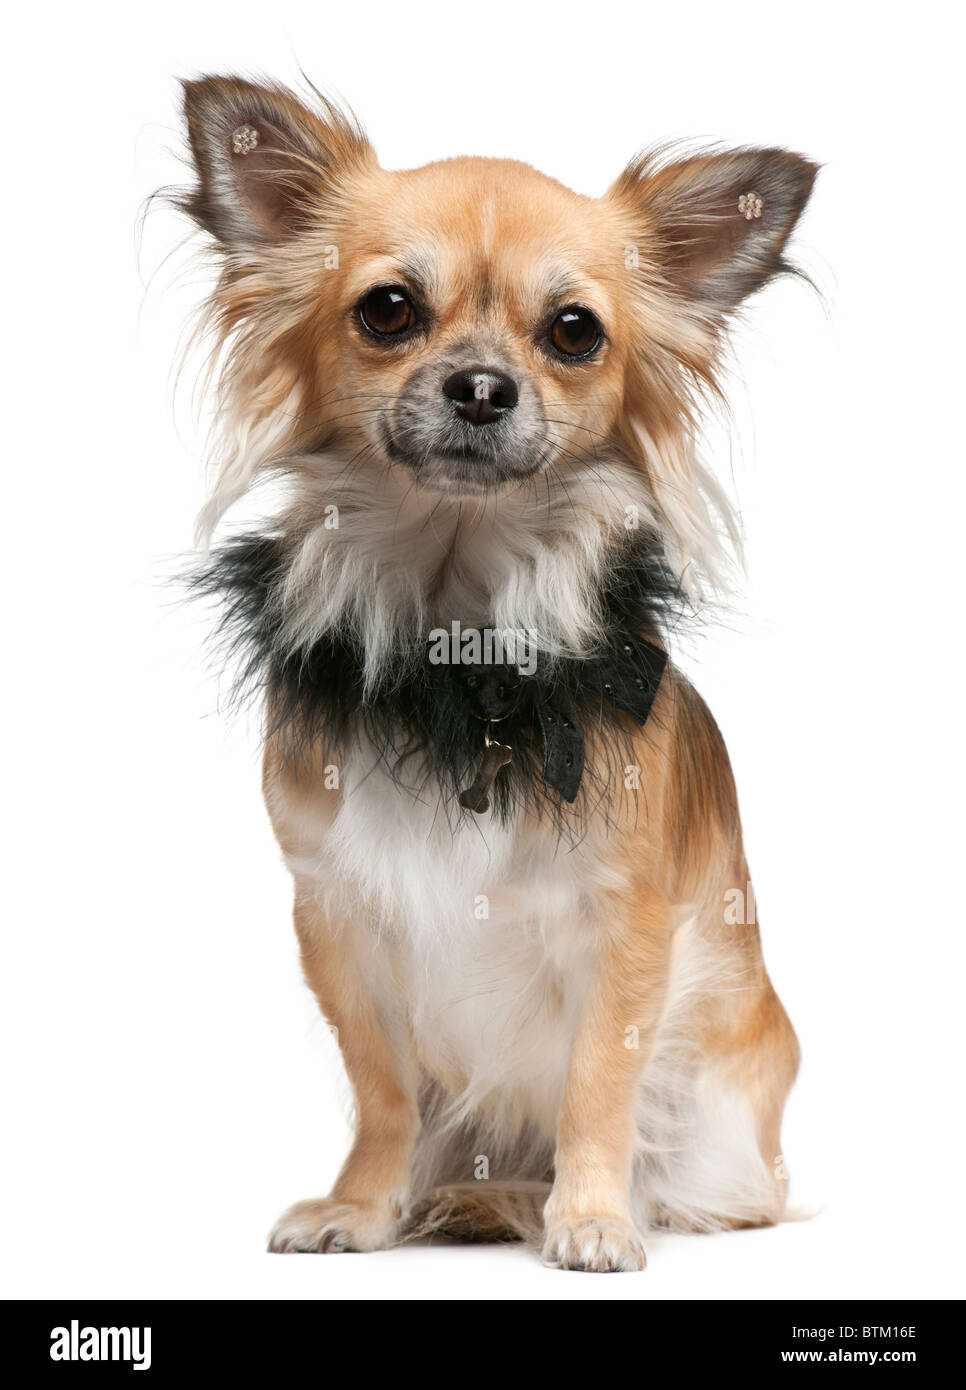 Chihuahua, 16 years old, in front of white background Banque D'Images